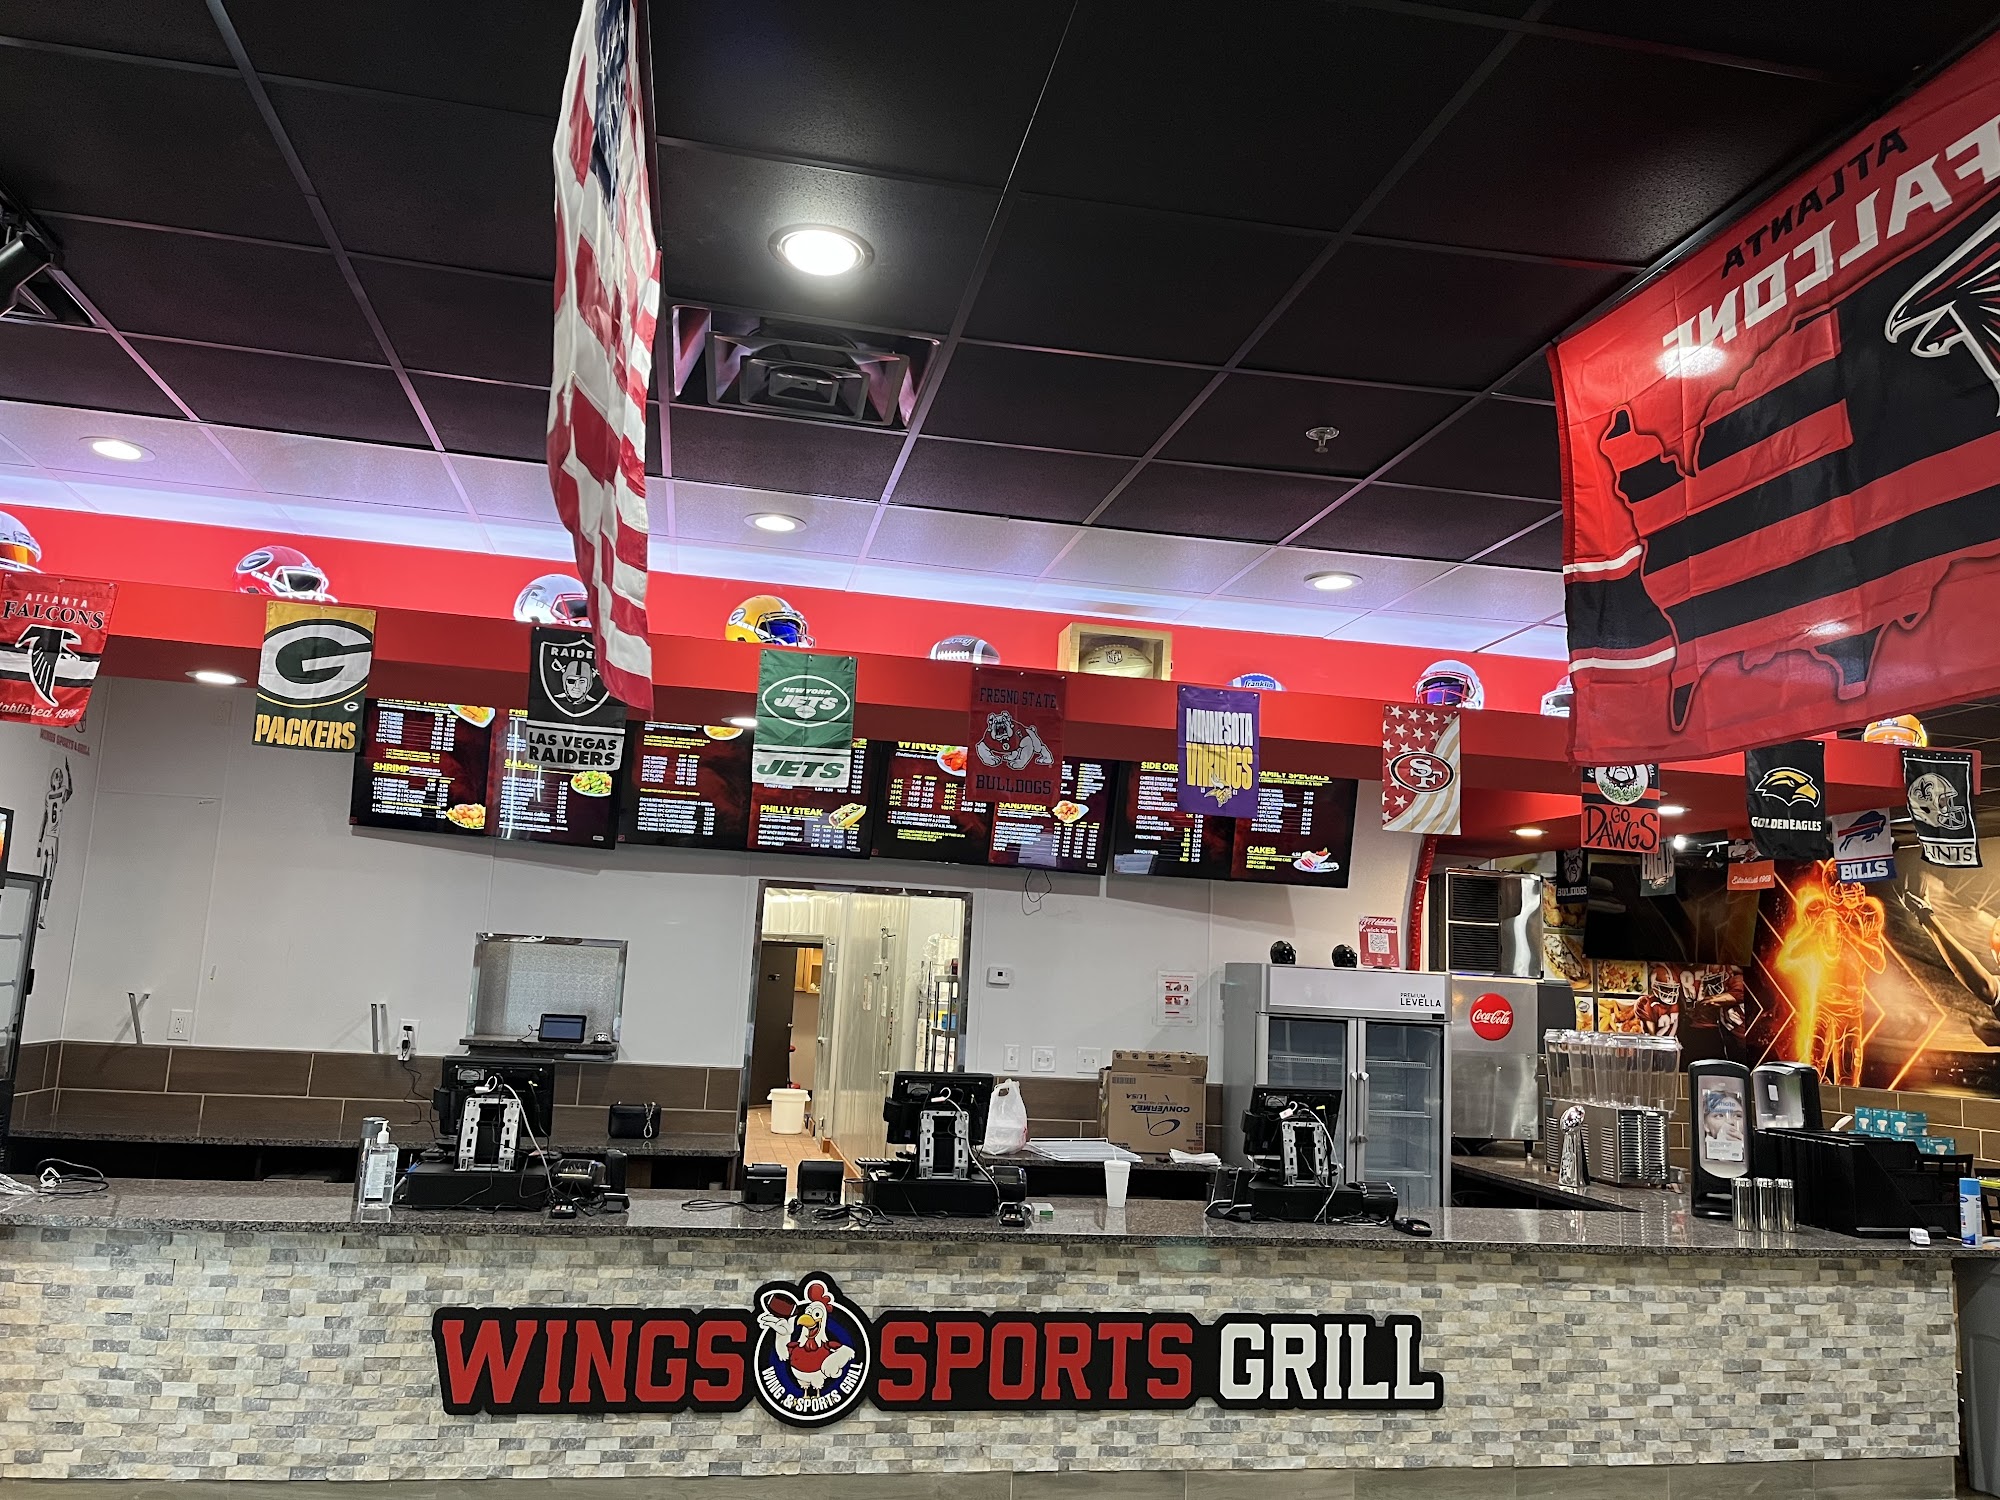 Wings Sports Grill